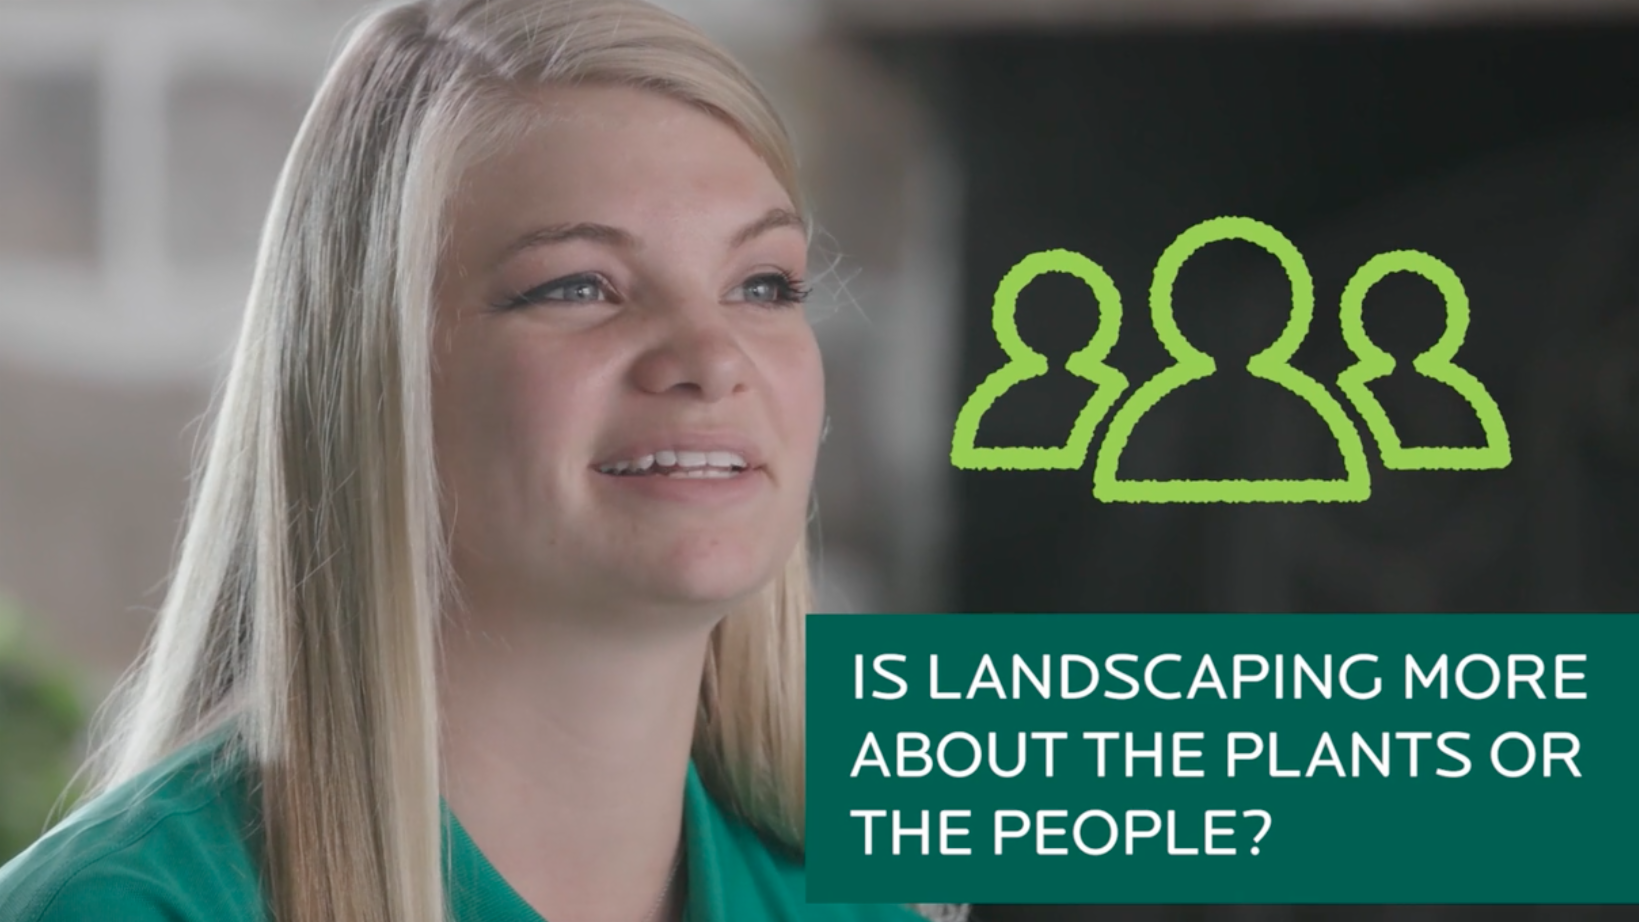 Is Landscaping More about the Plants or the People? - Landscape Career Videos